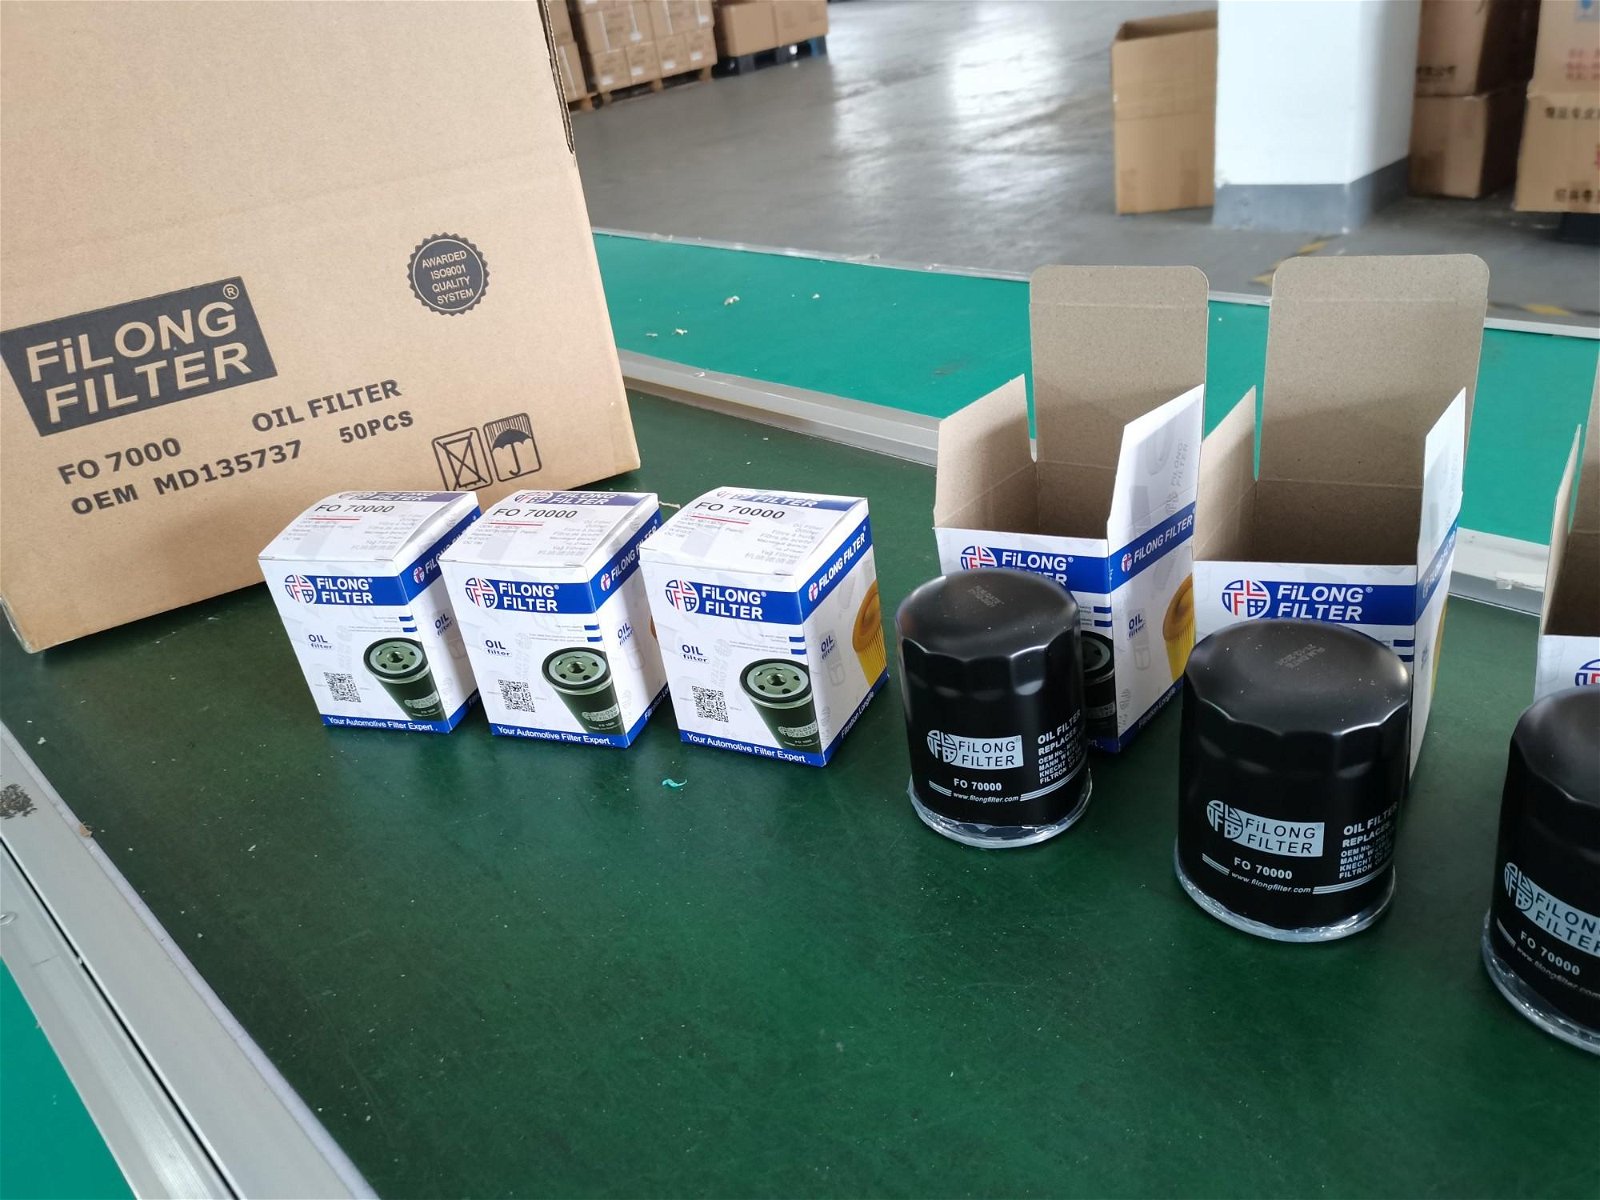 FILONG Manufactory FILONG Automotive Filters IN CHINA, FILONG FILTER SUPPLIER